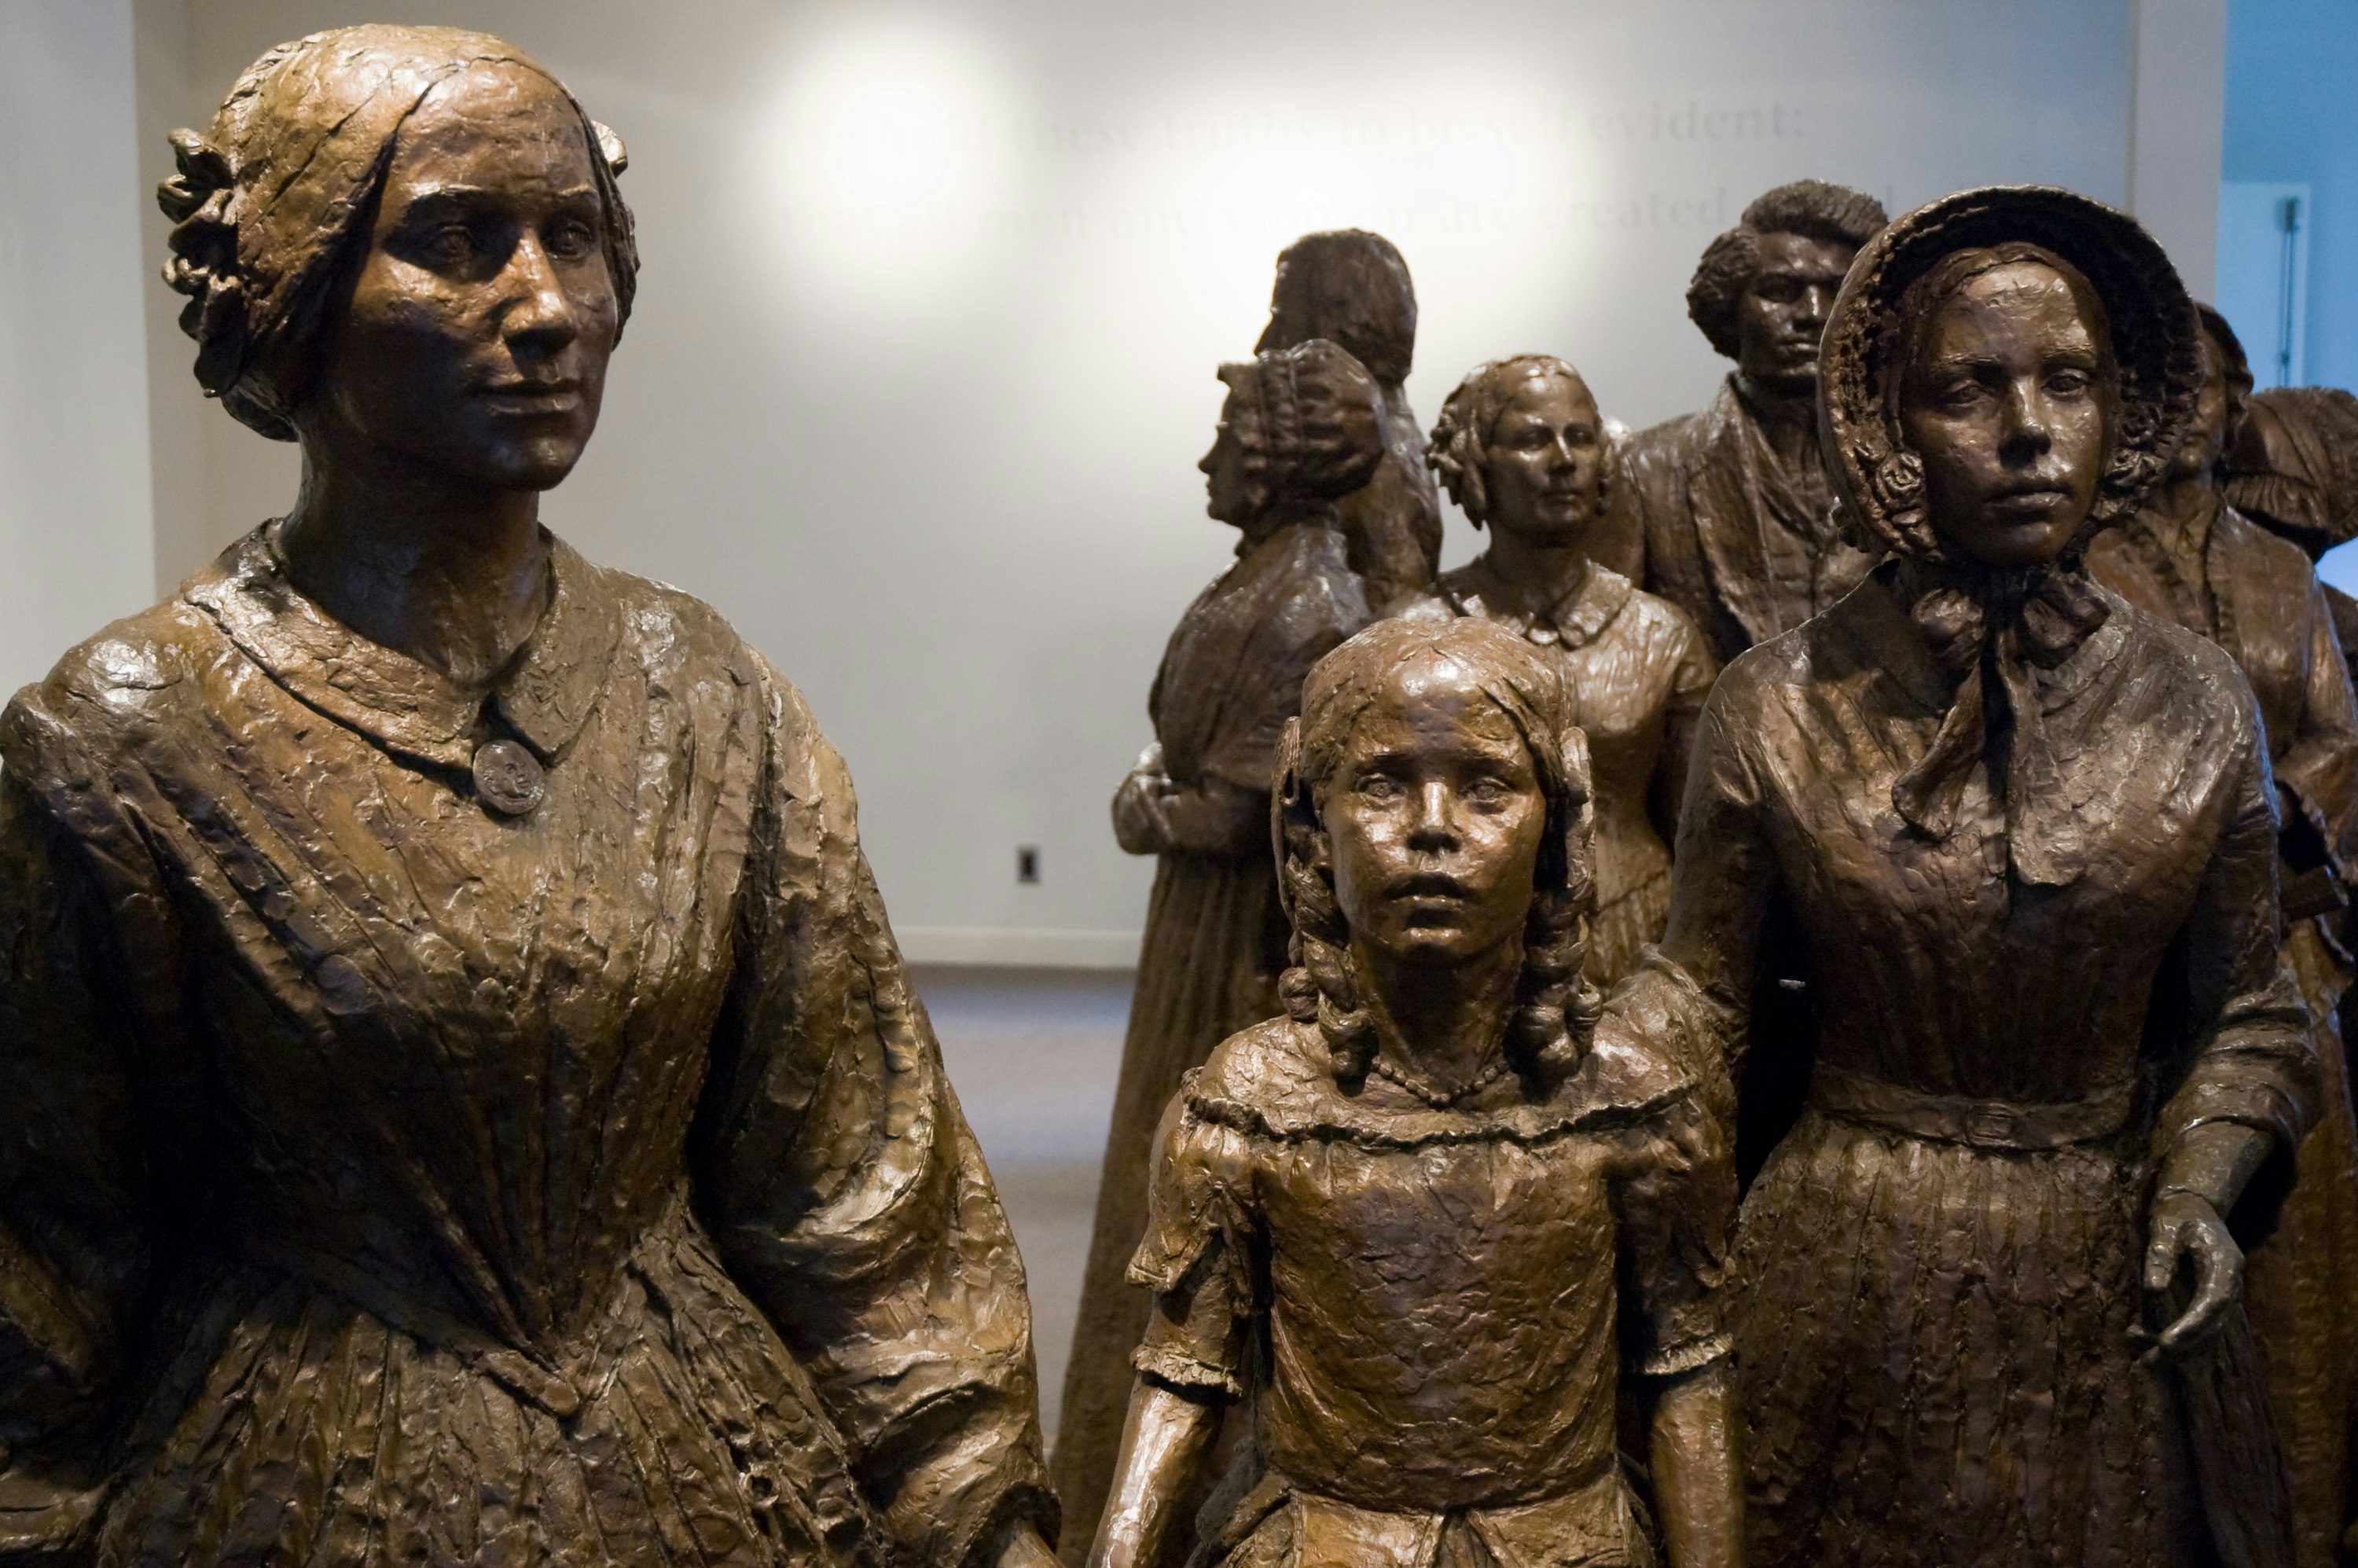 Bronze statues of famous women at the Women's Rights National Historical Park